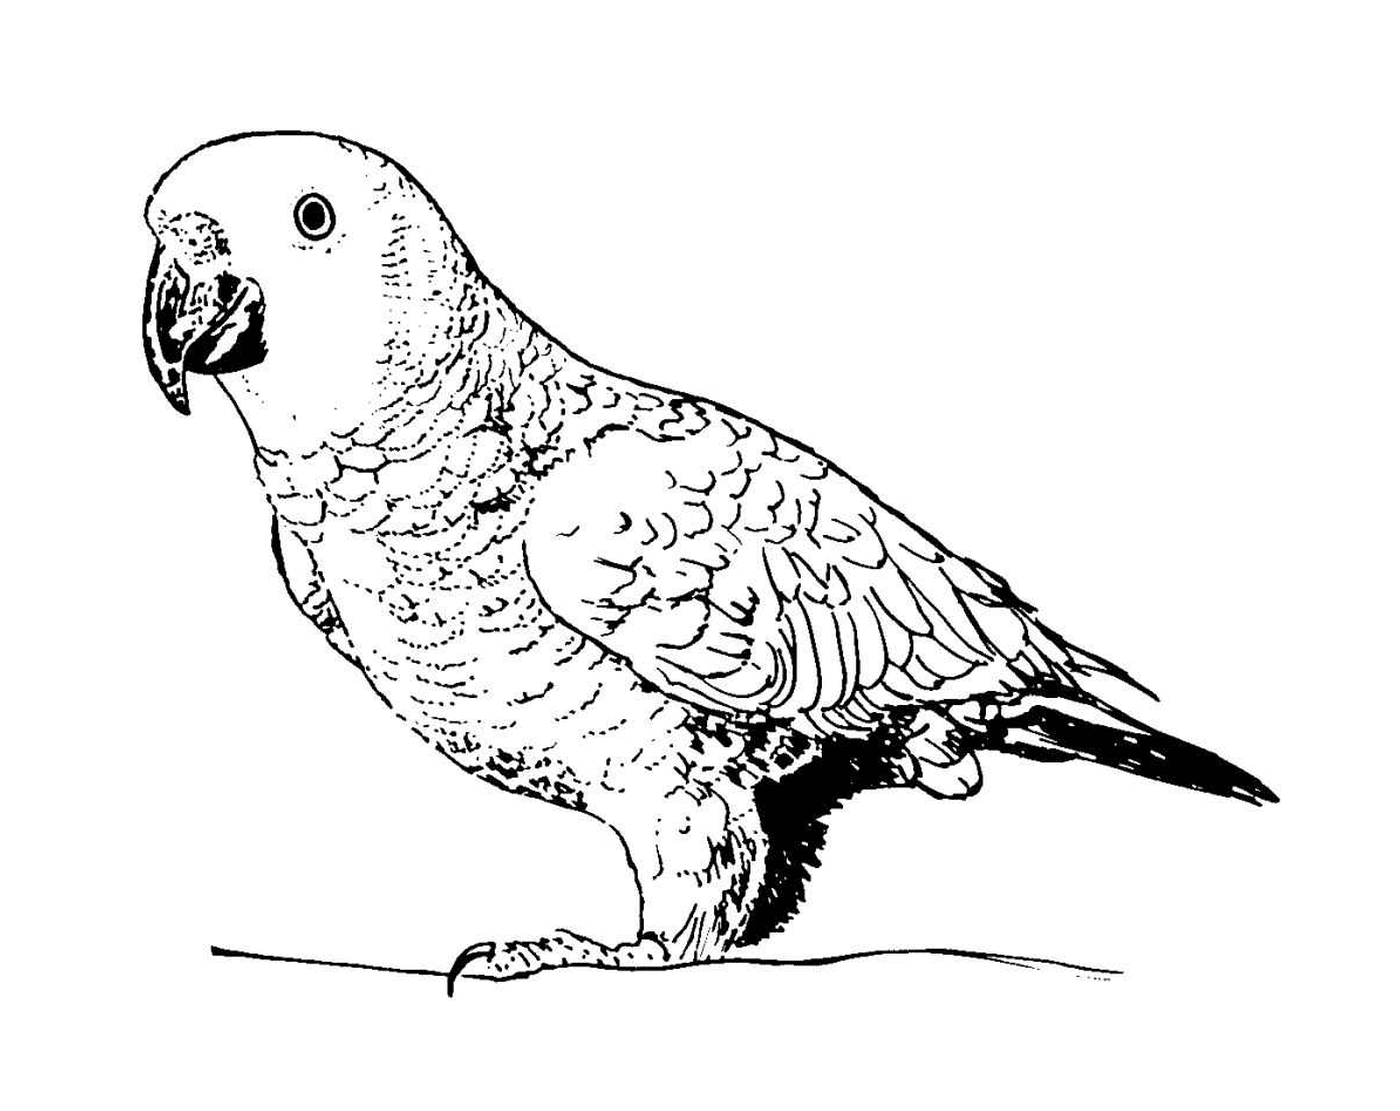  parrot feeding on fruits and seeds 